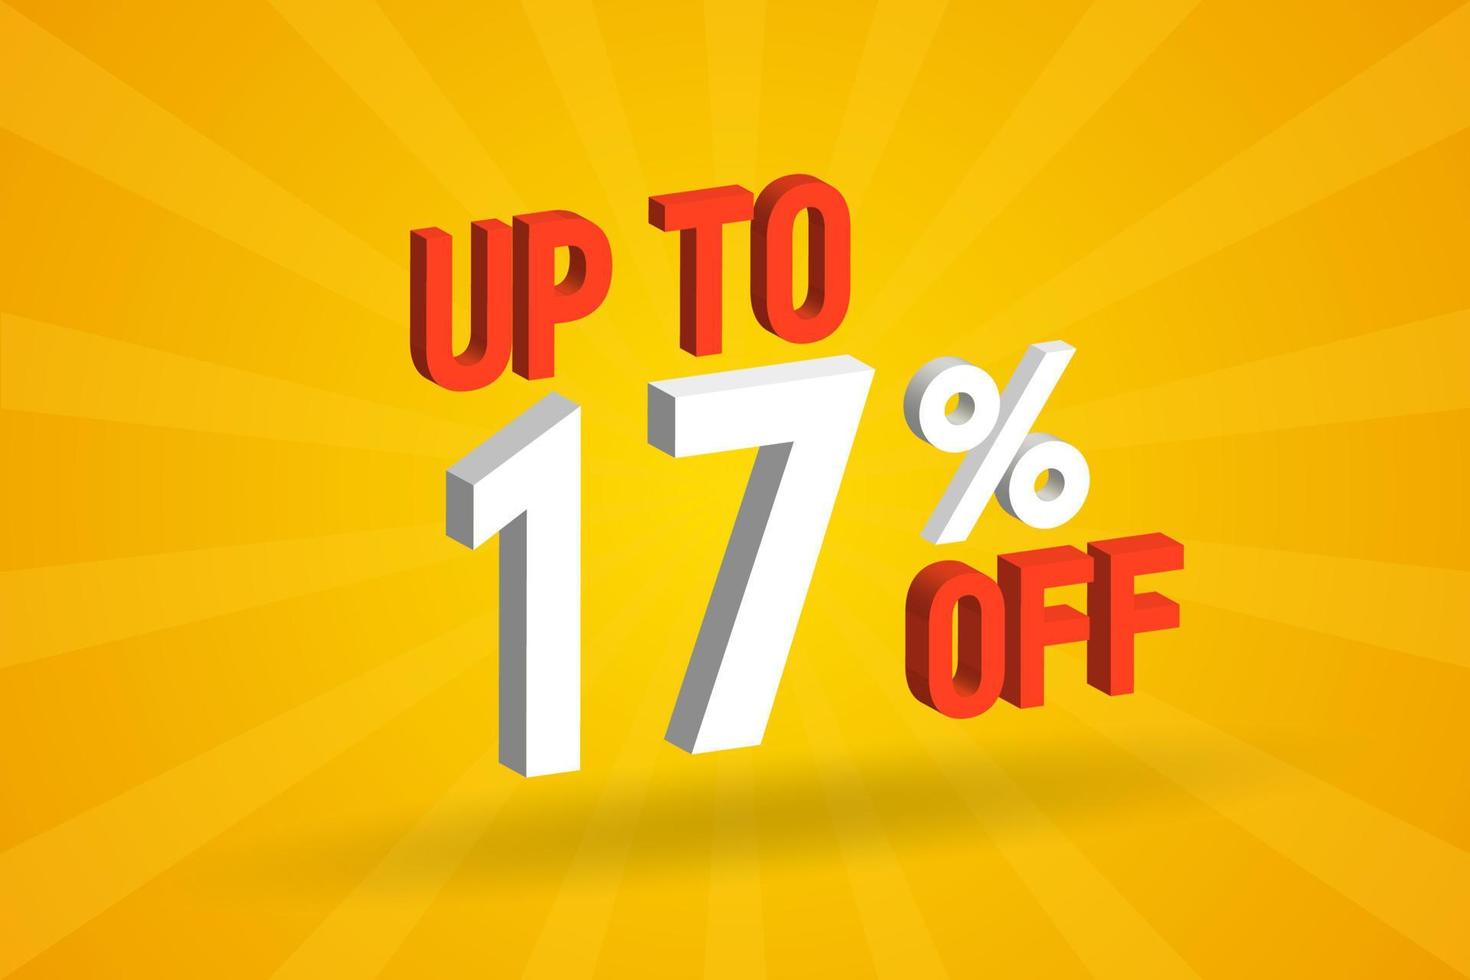 Up To 17 Percent off 3D Special promotional campaign design. Upto 17 of 3D Discount Offer for Sale and marketing. vector